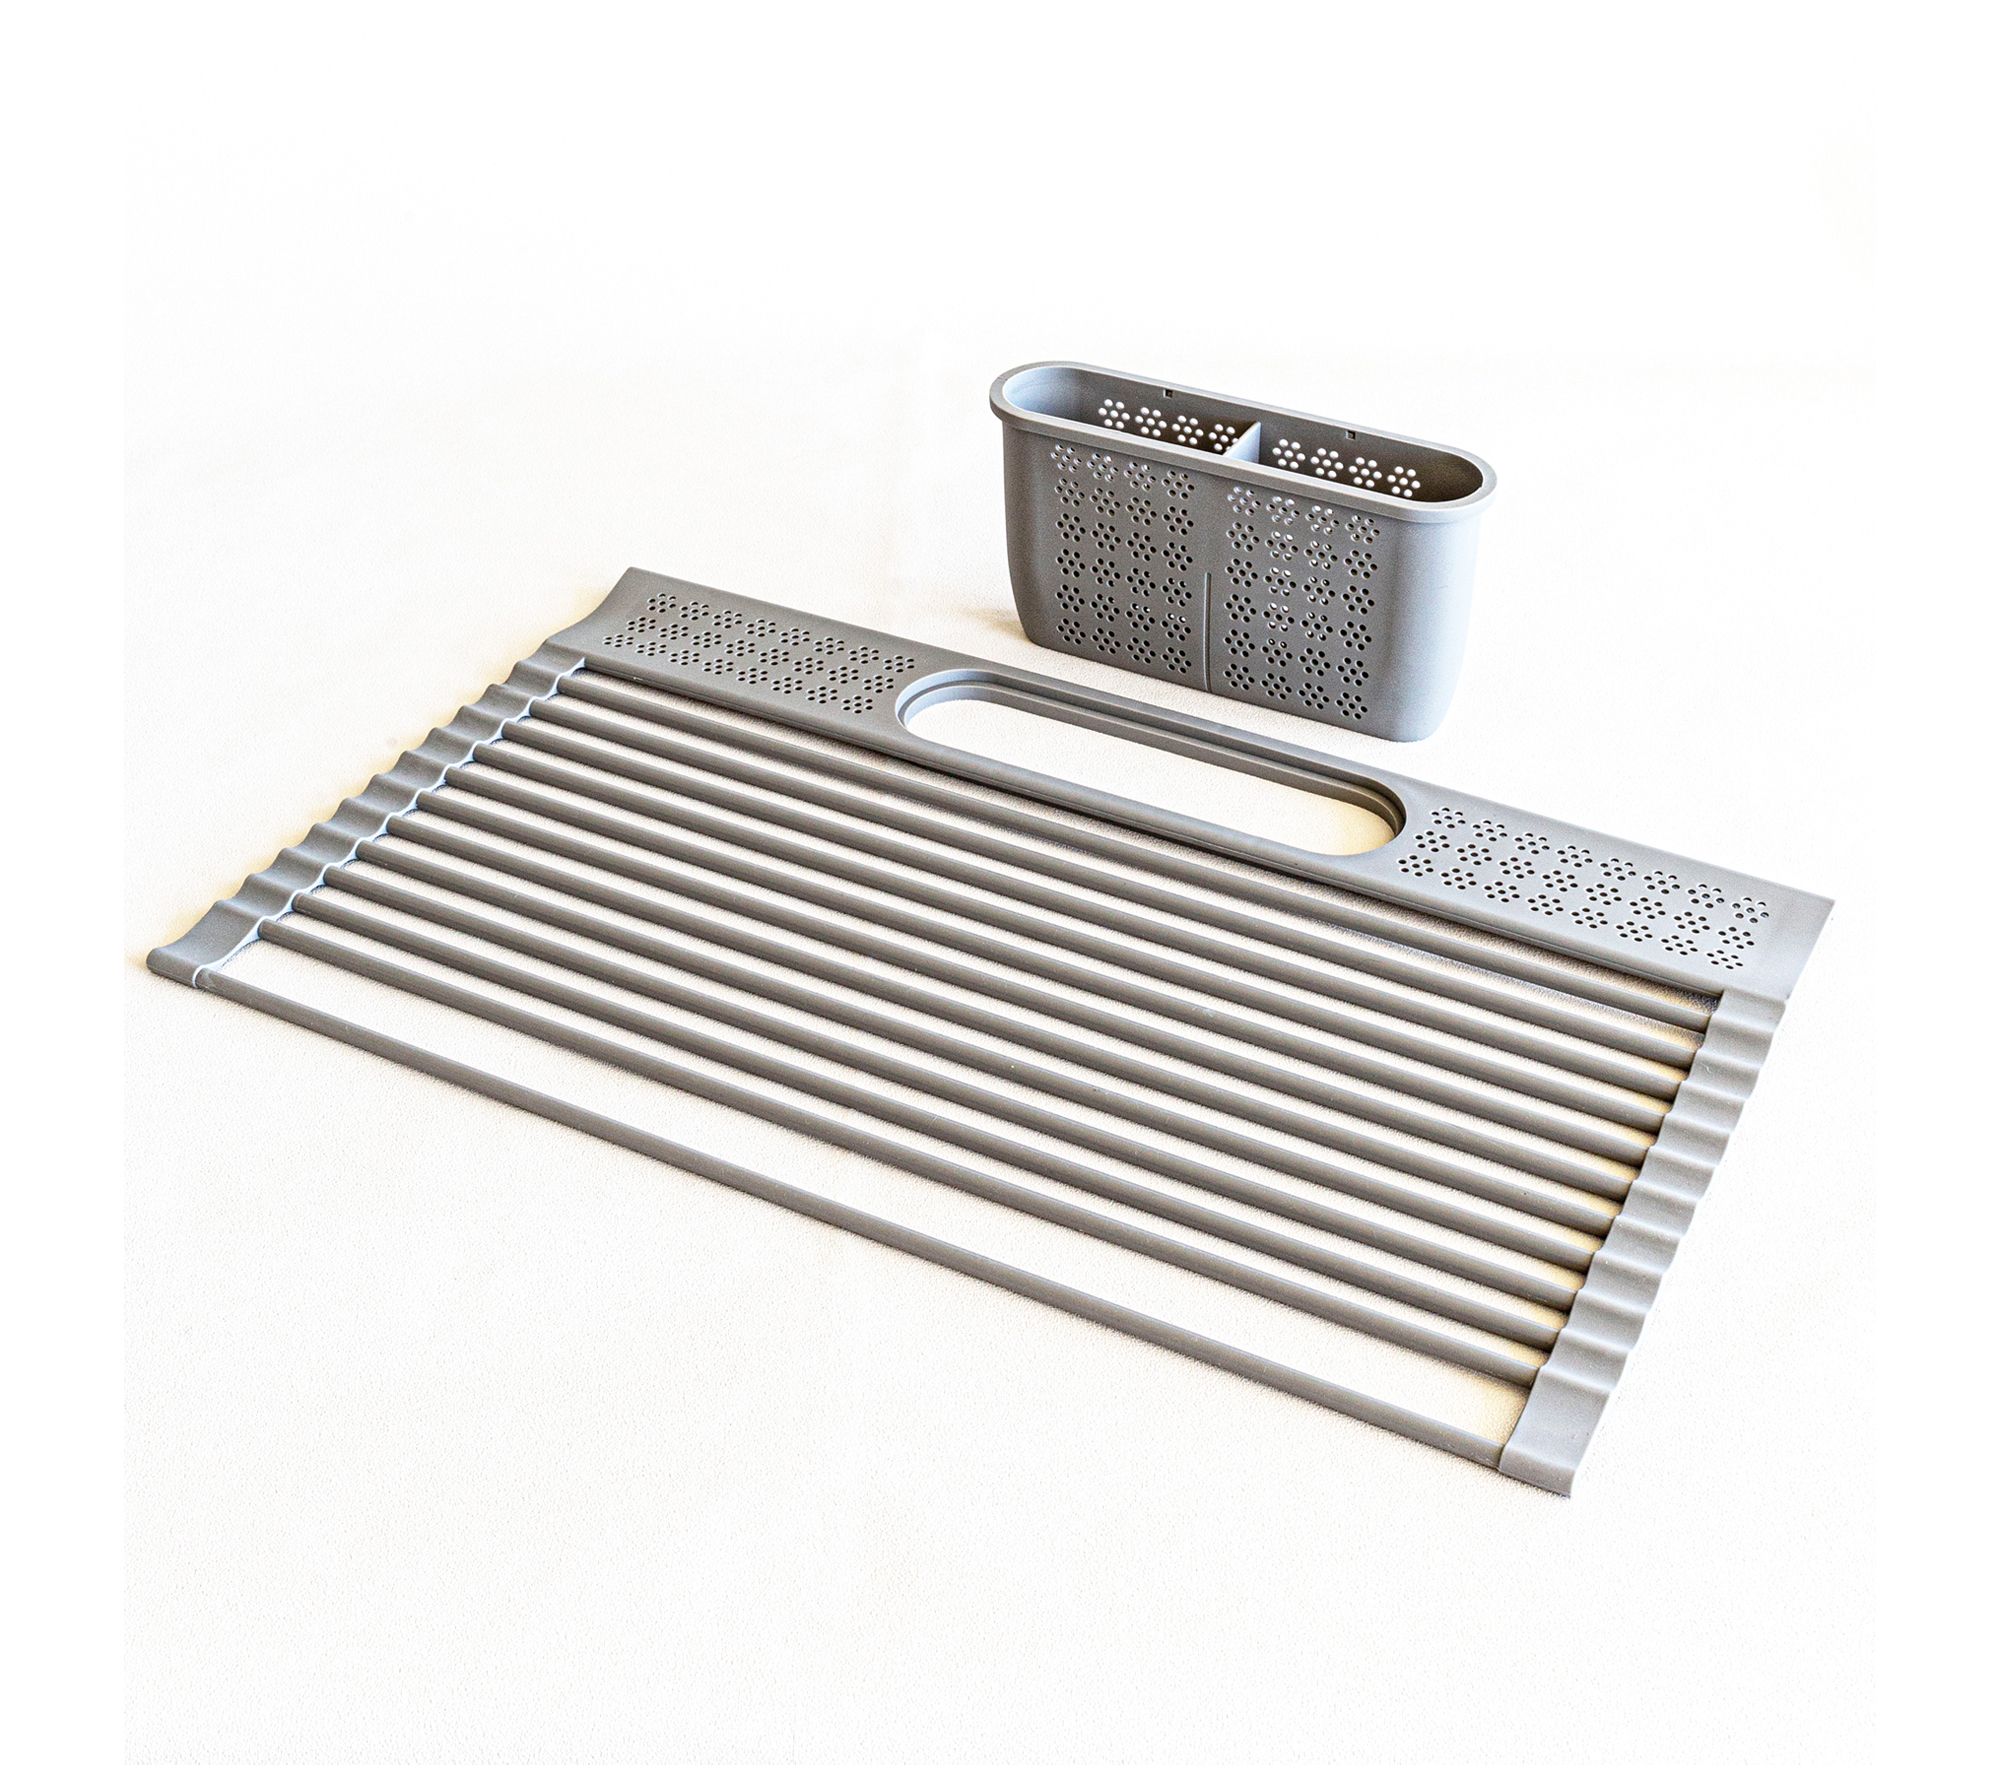 Grand Fusion Roll-Up Sink Drying Rack - Stainless Steel